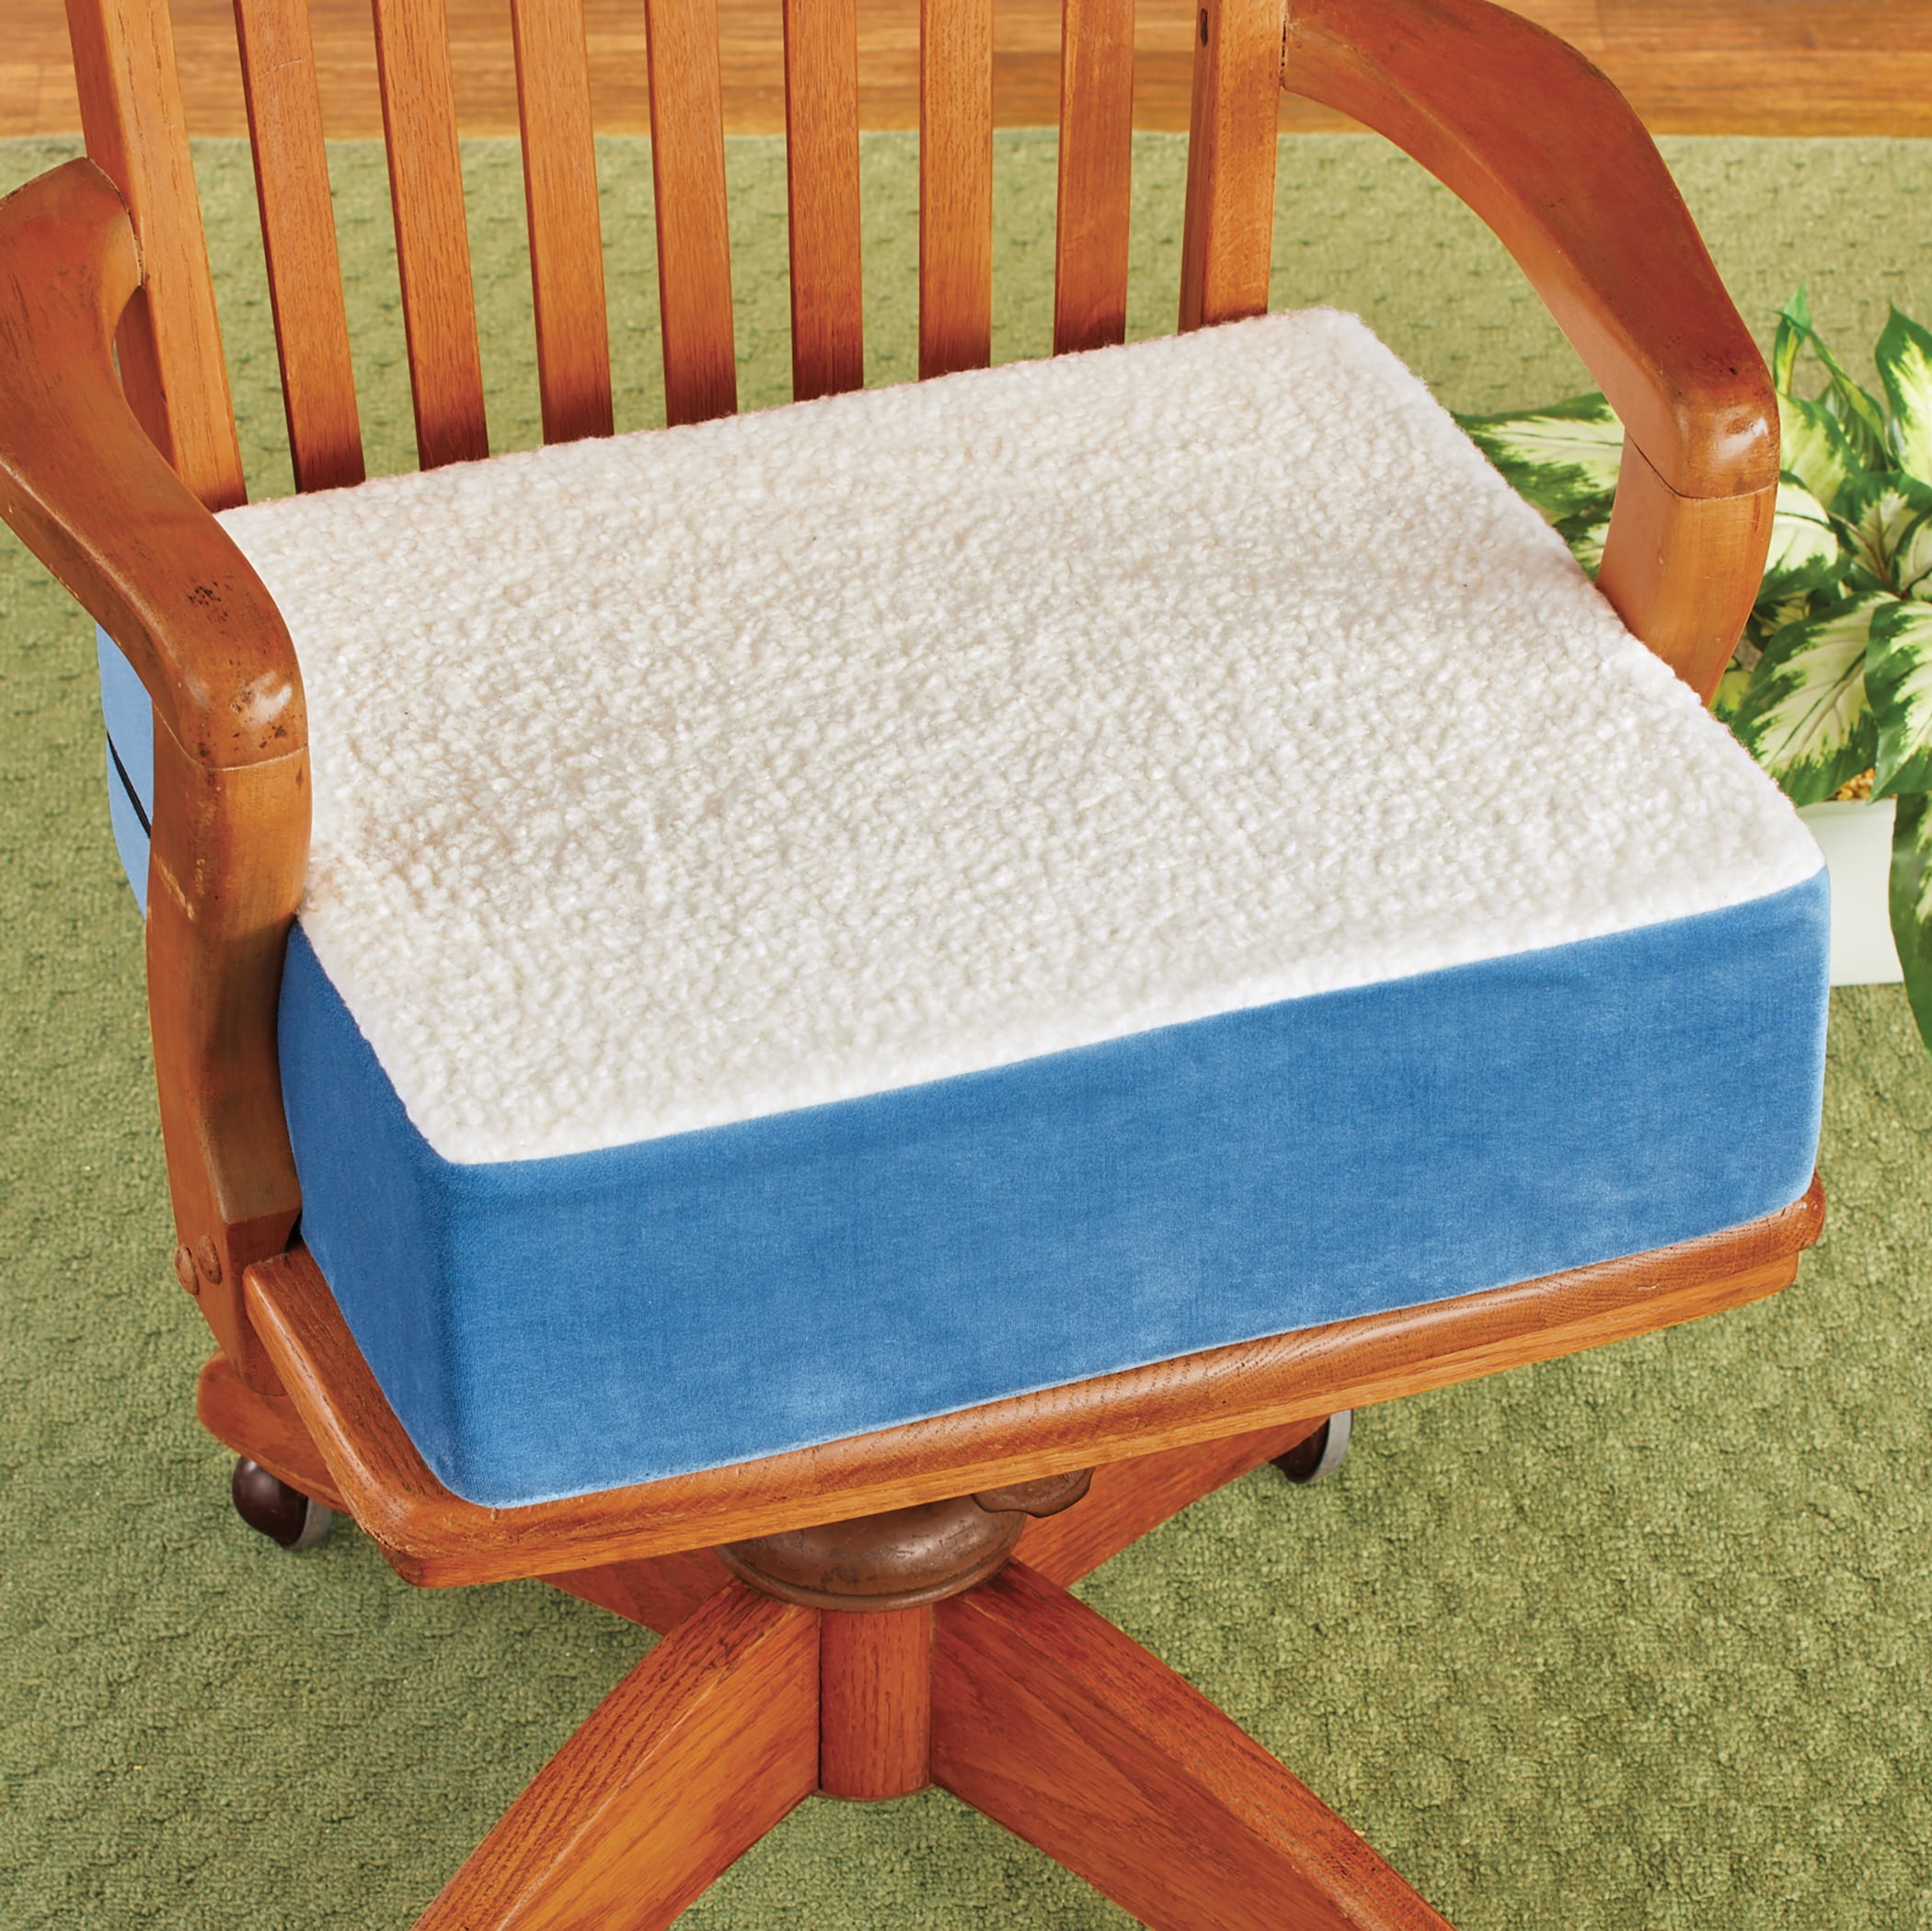 Extra Thick Chair Cushion Booster Seat Cushion 4.5” Chair Pad Hot Tub Booster Seat for Adults Elderly Thick Firm Chair Riser Seat Cushion for Chair